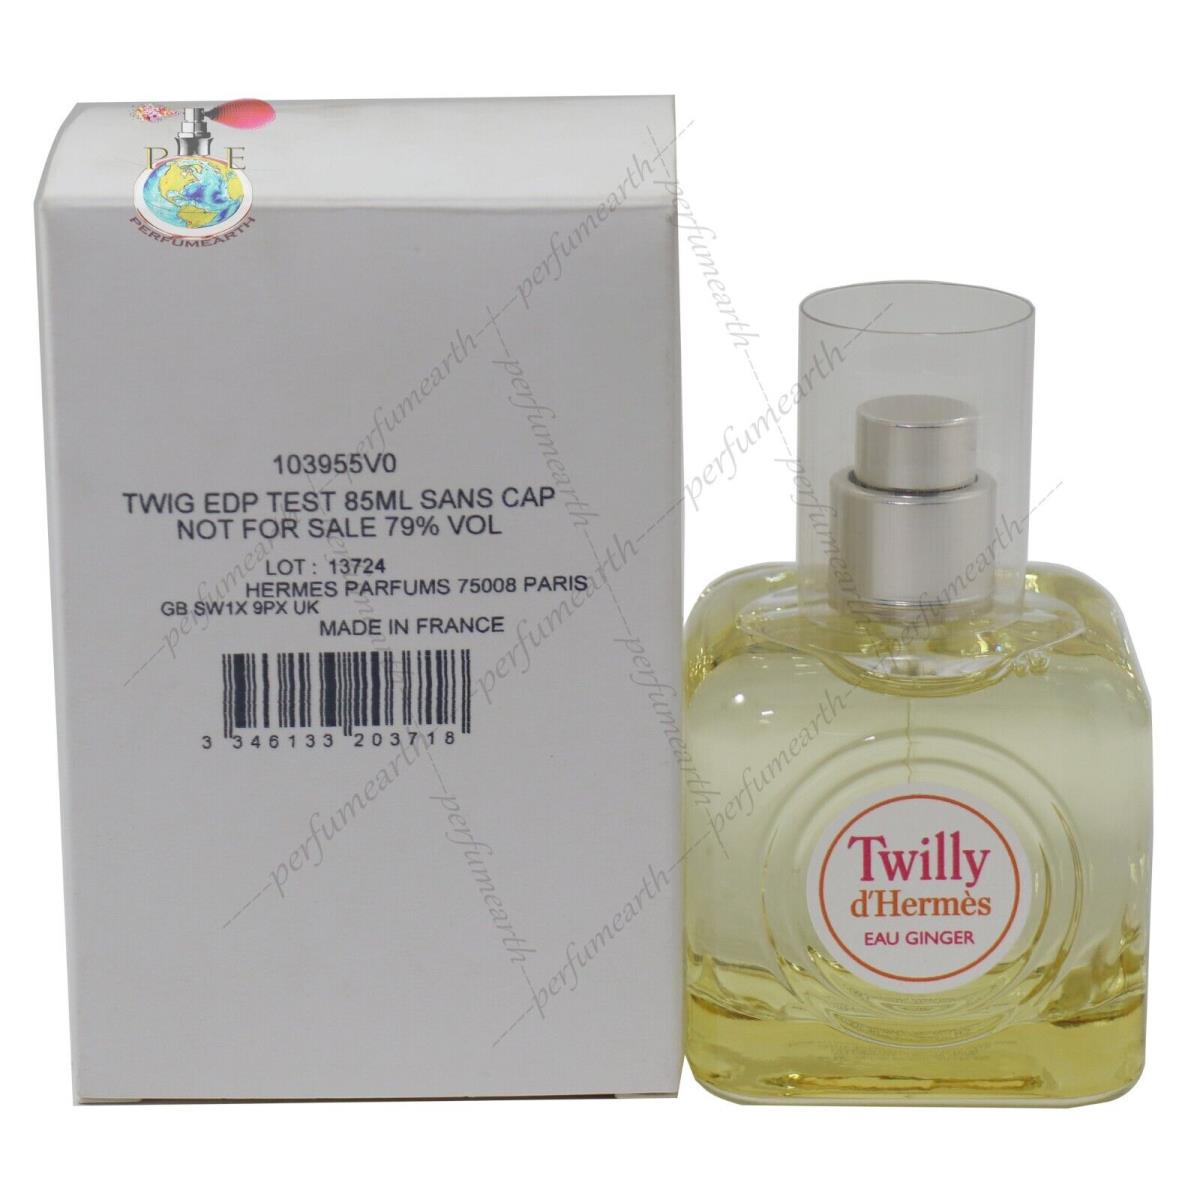 Twilly D`hermes Eau Ginger 2.87oz/85ml Edp Spray For Women Same As Picture